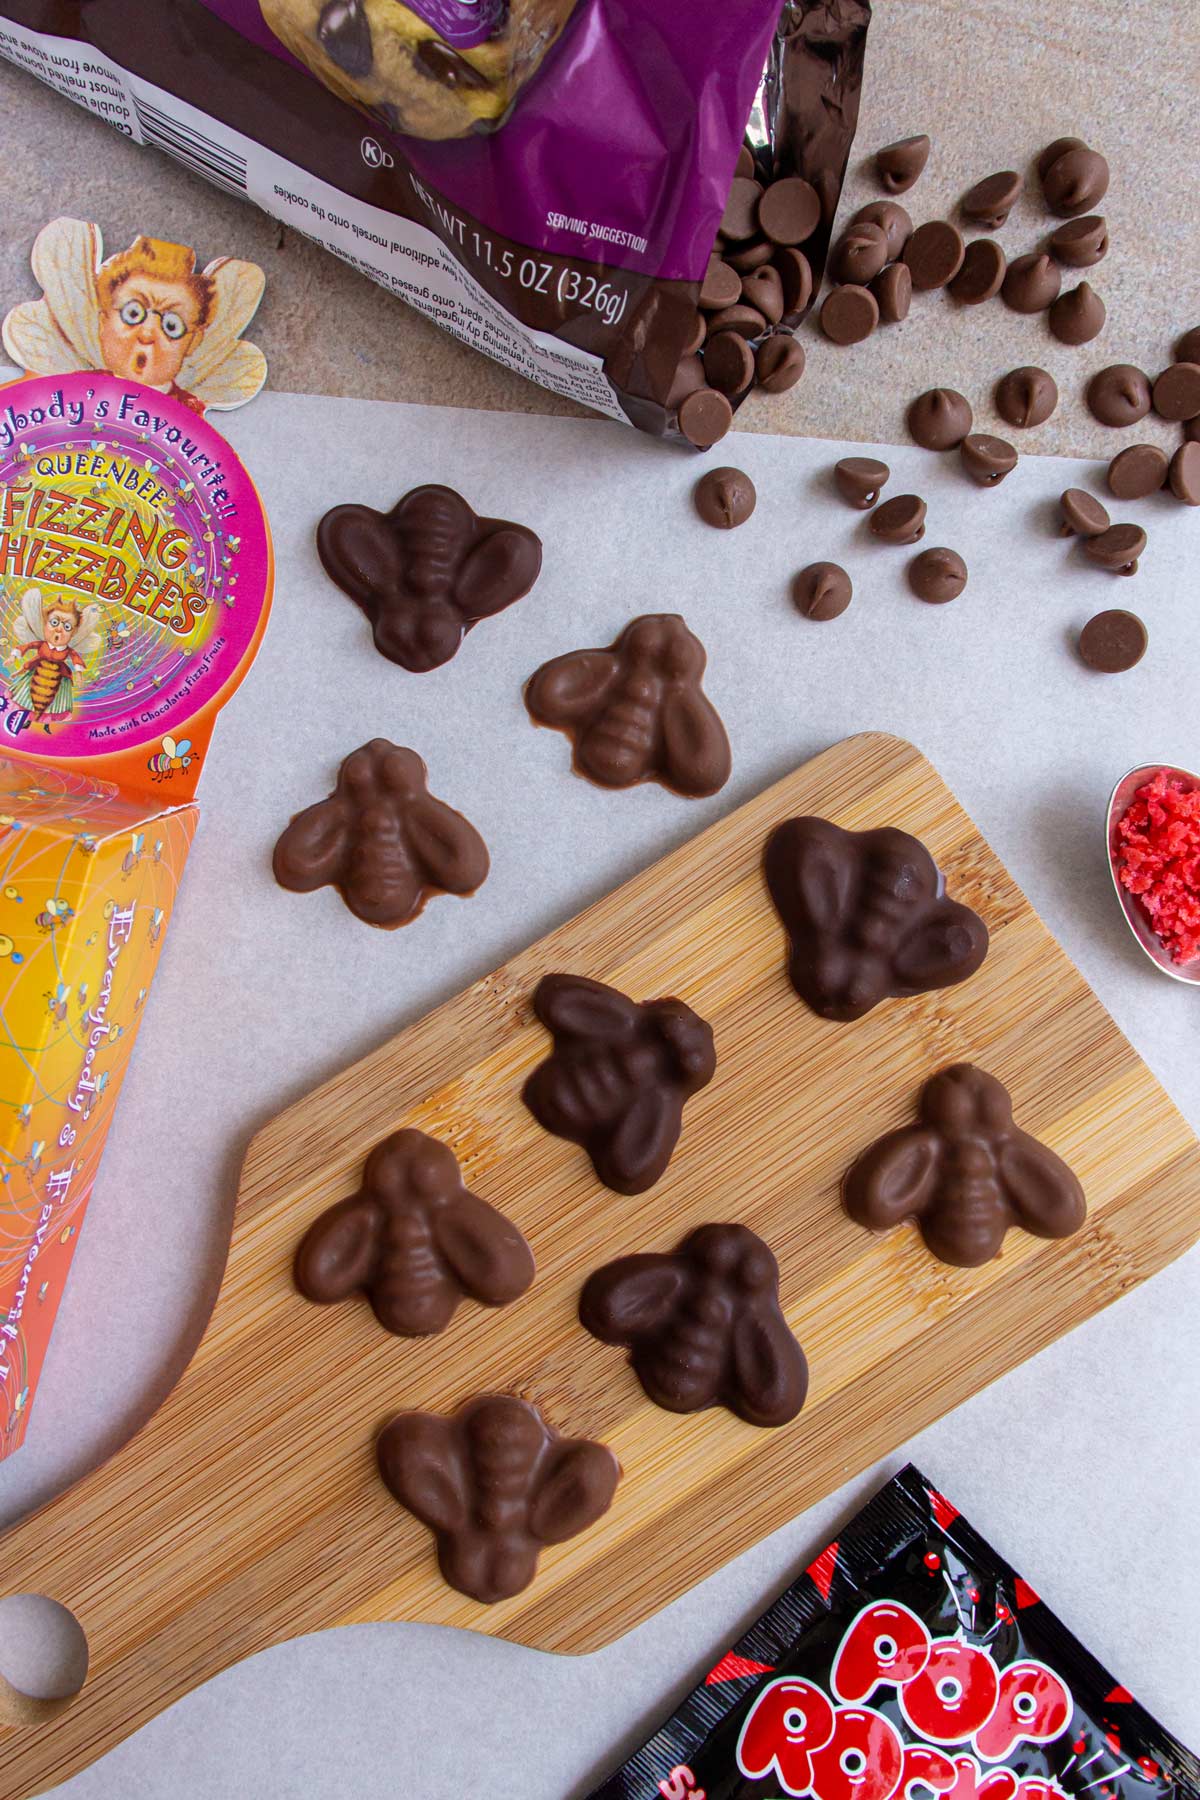 Bee shaped chocolates on a small wooden board, chocolate chips, and a package of Pop Rocks.